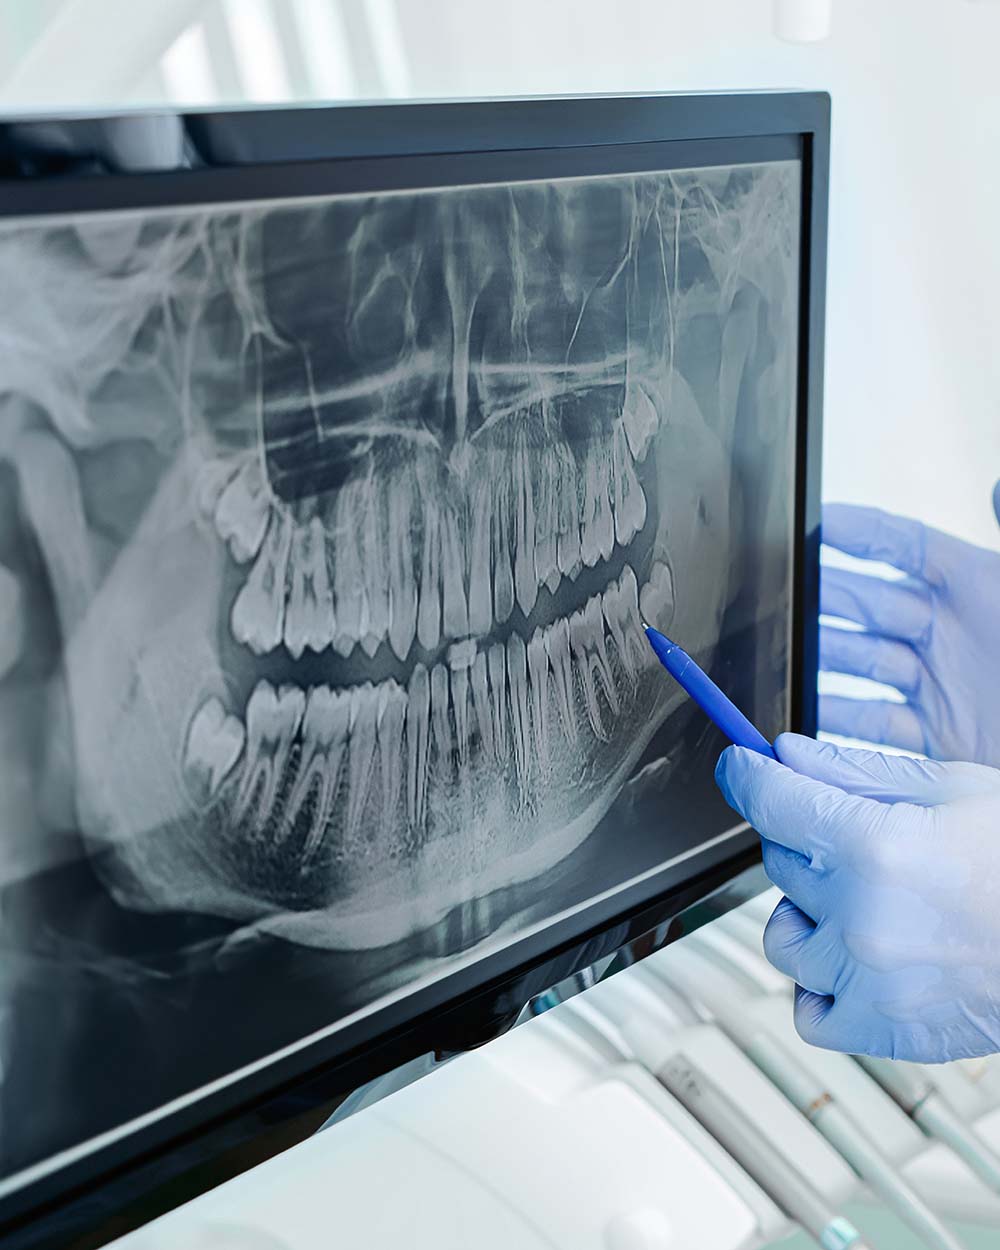 A team member examines a dental x-ray at LaGrange Oral Surgery & Implant Center.